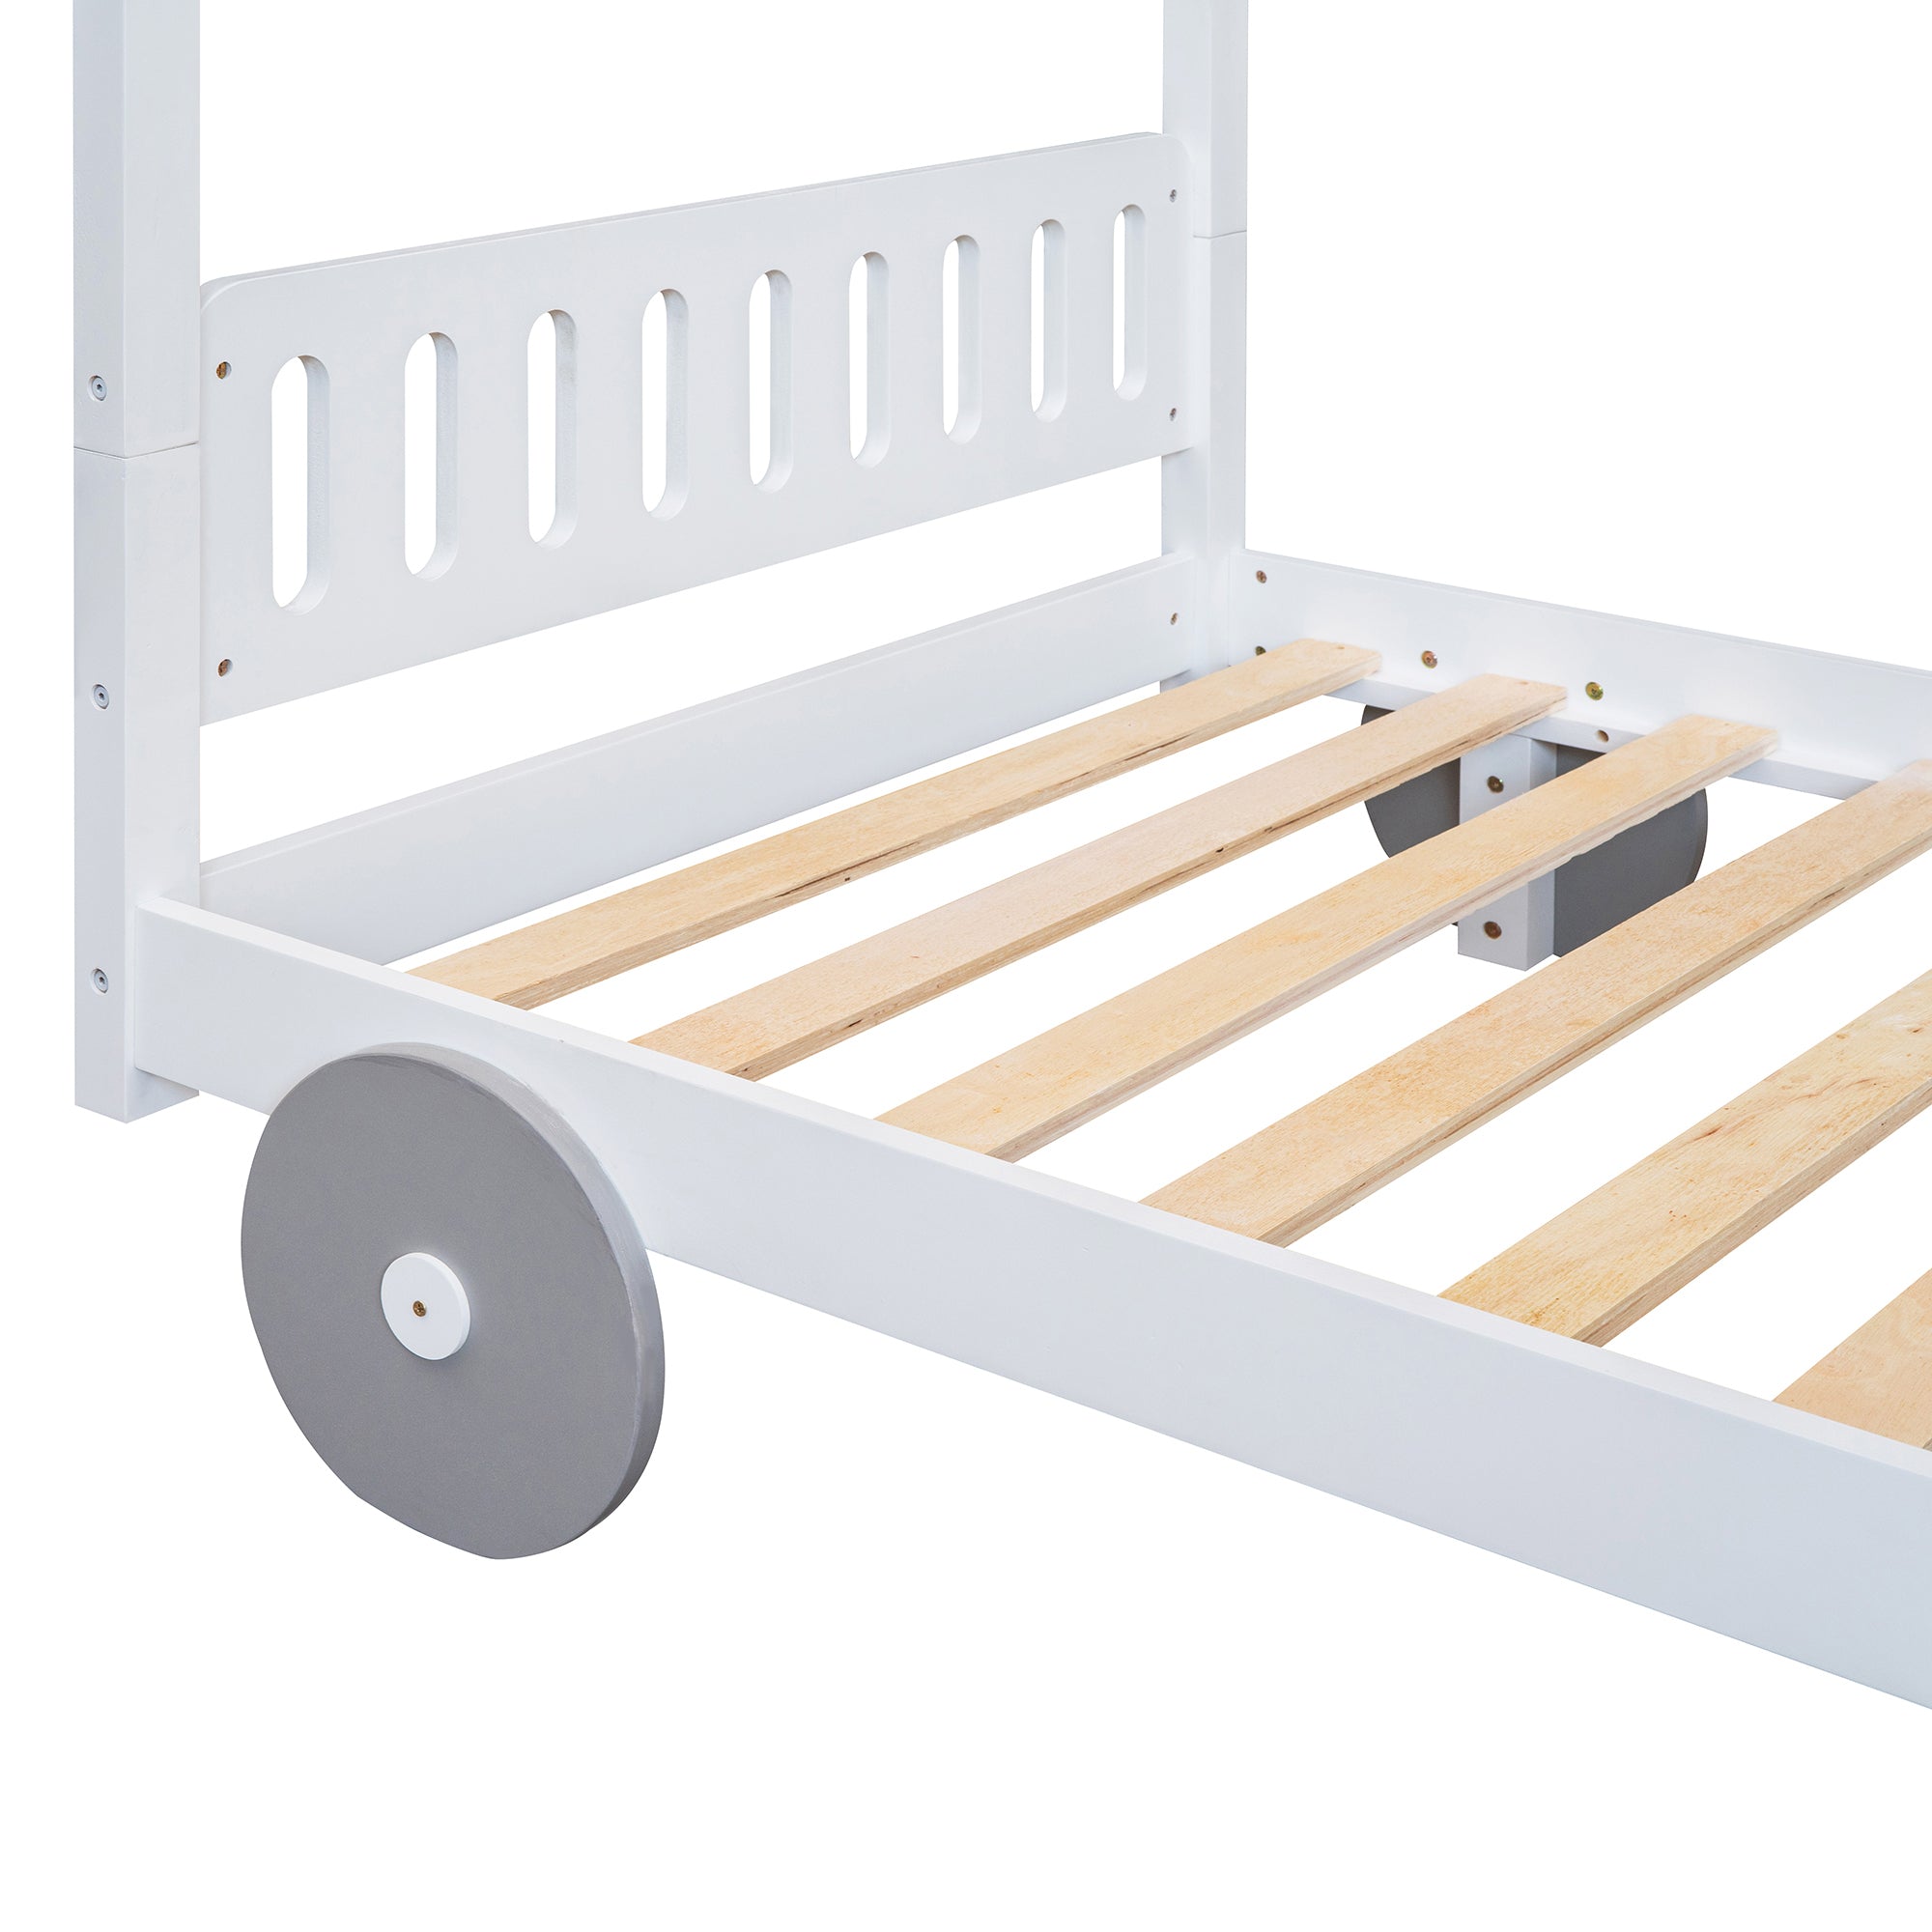 Twin Size Canopy Car-Shaped Platform Bed (White)